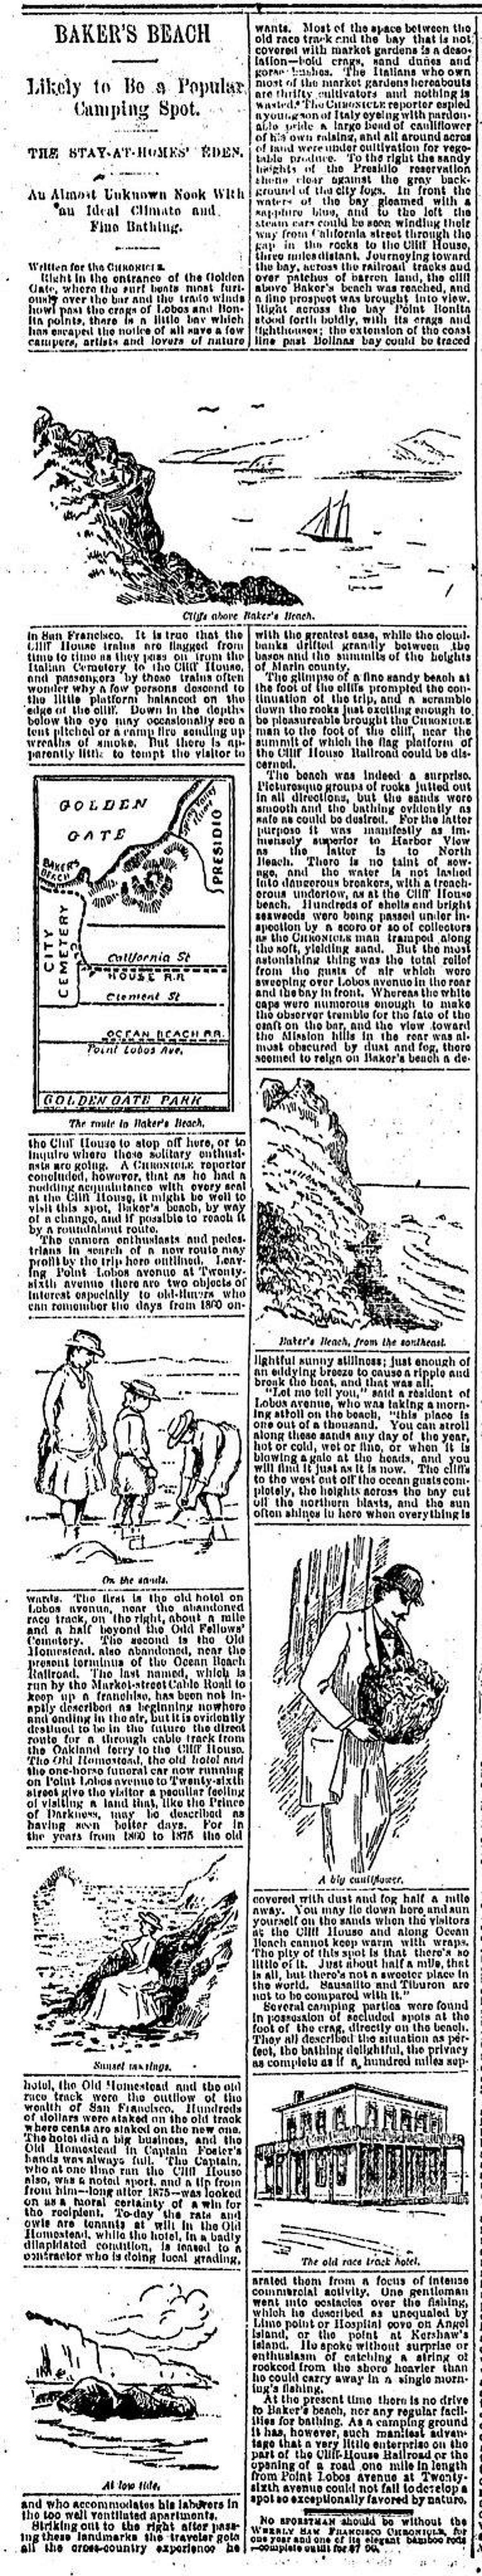 The charms of Baker's Beach are described in a Chronicle story on beaches on September 10, 1889